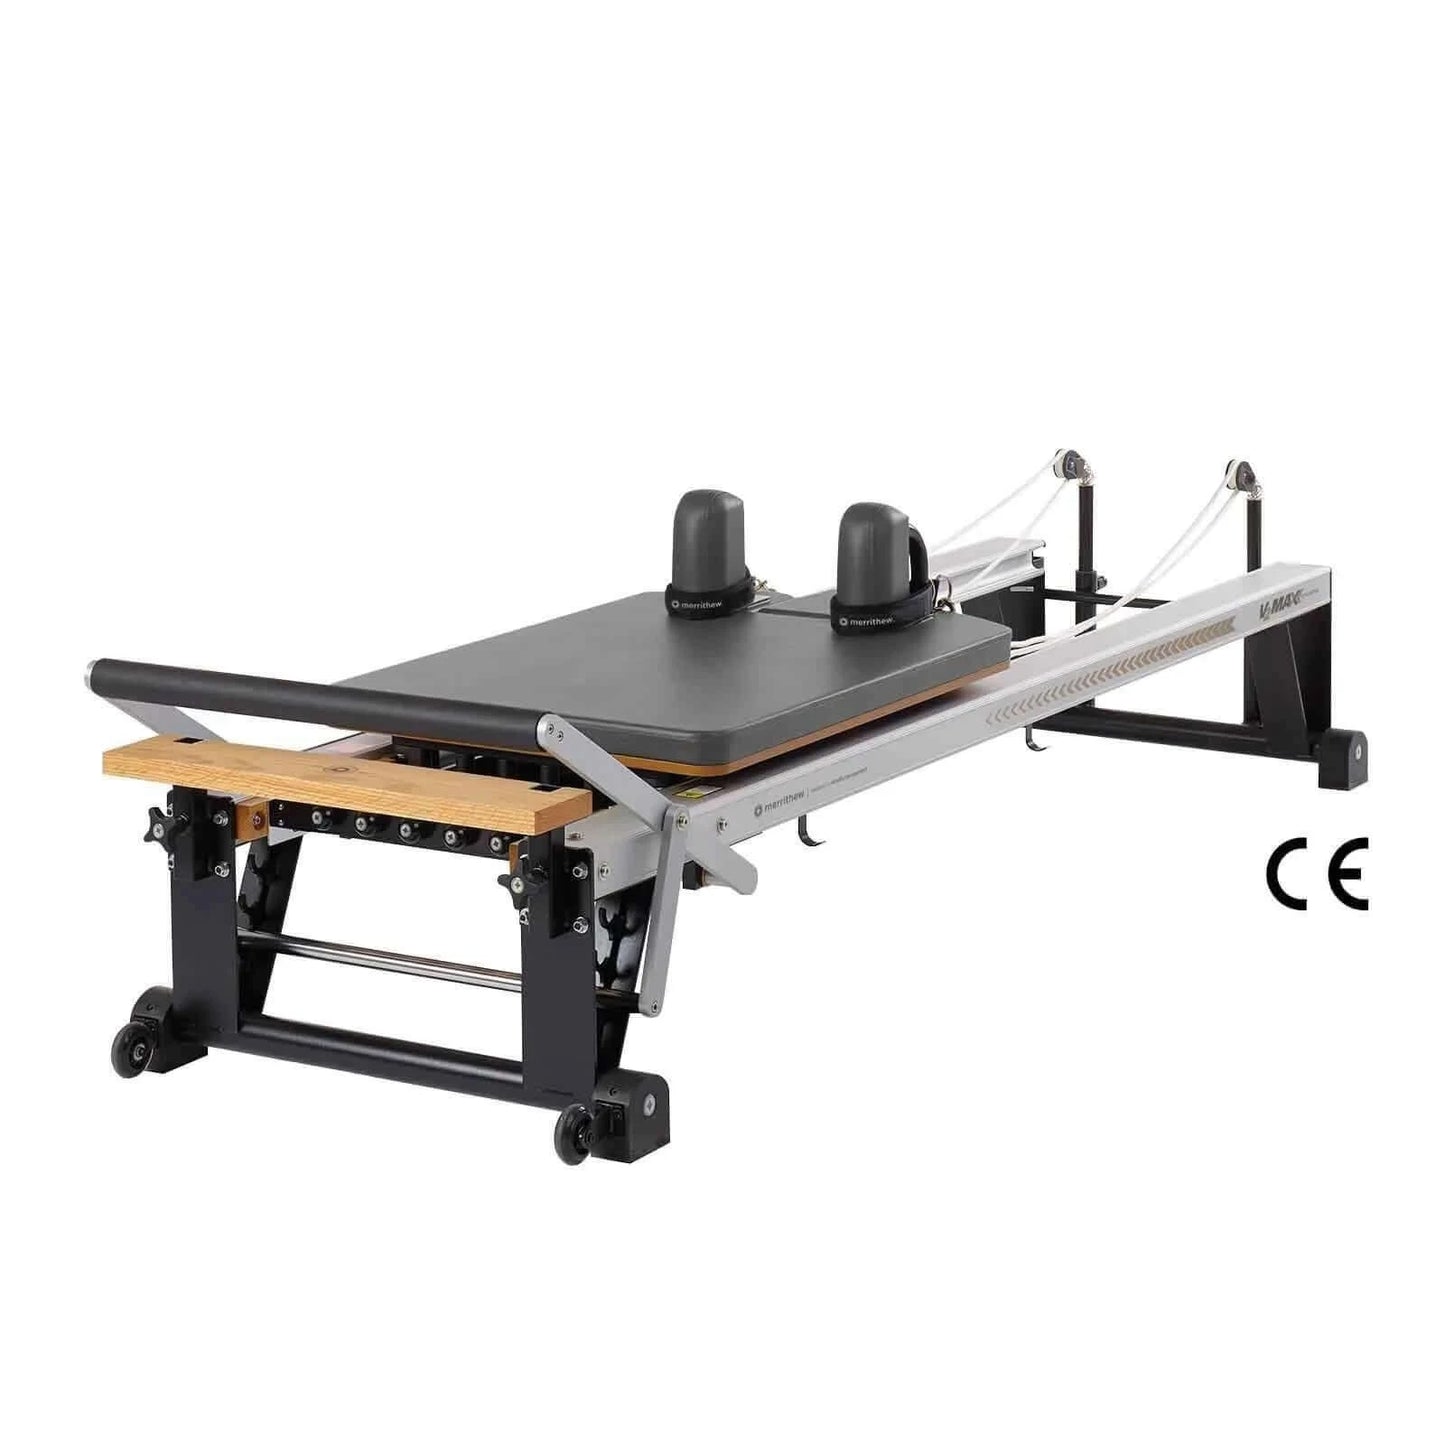 Gunmetal Gray Merrithew™ Pilates V2 Max™ Reformer Machine by Merrithew™ sold by Pilates Matters® by BSP LLC